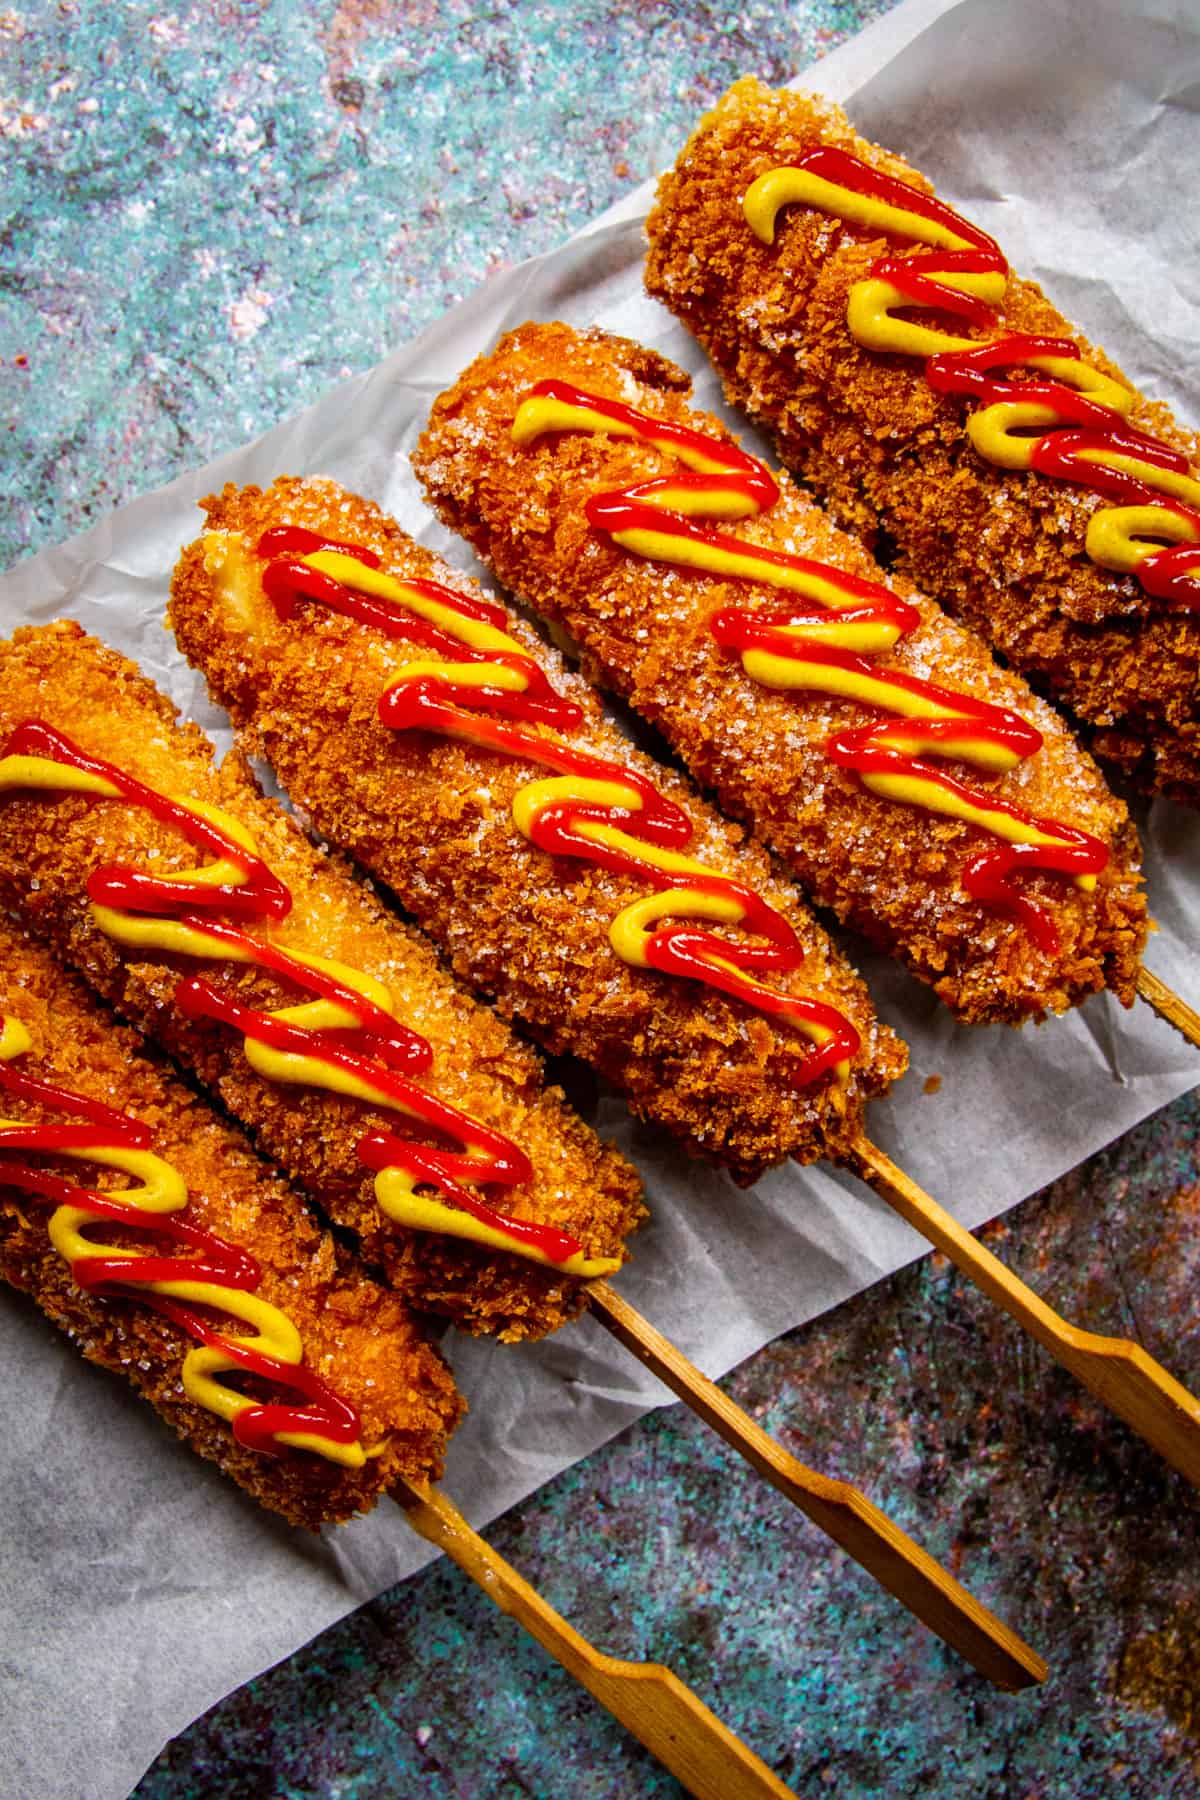 5 Korean corn dogs with ketchup and mustard drizzled over top.